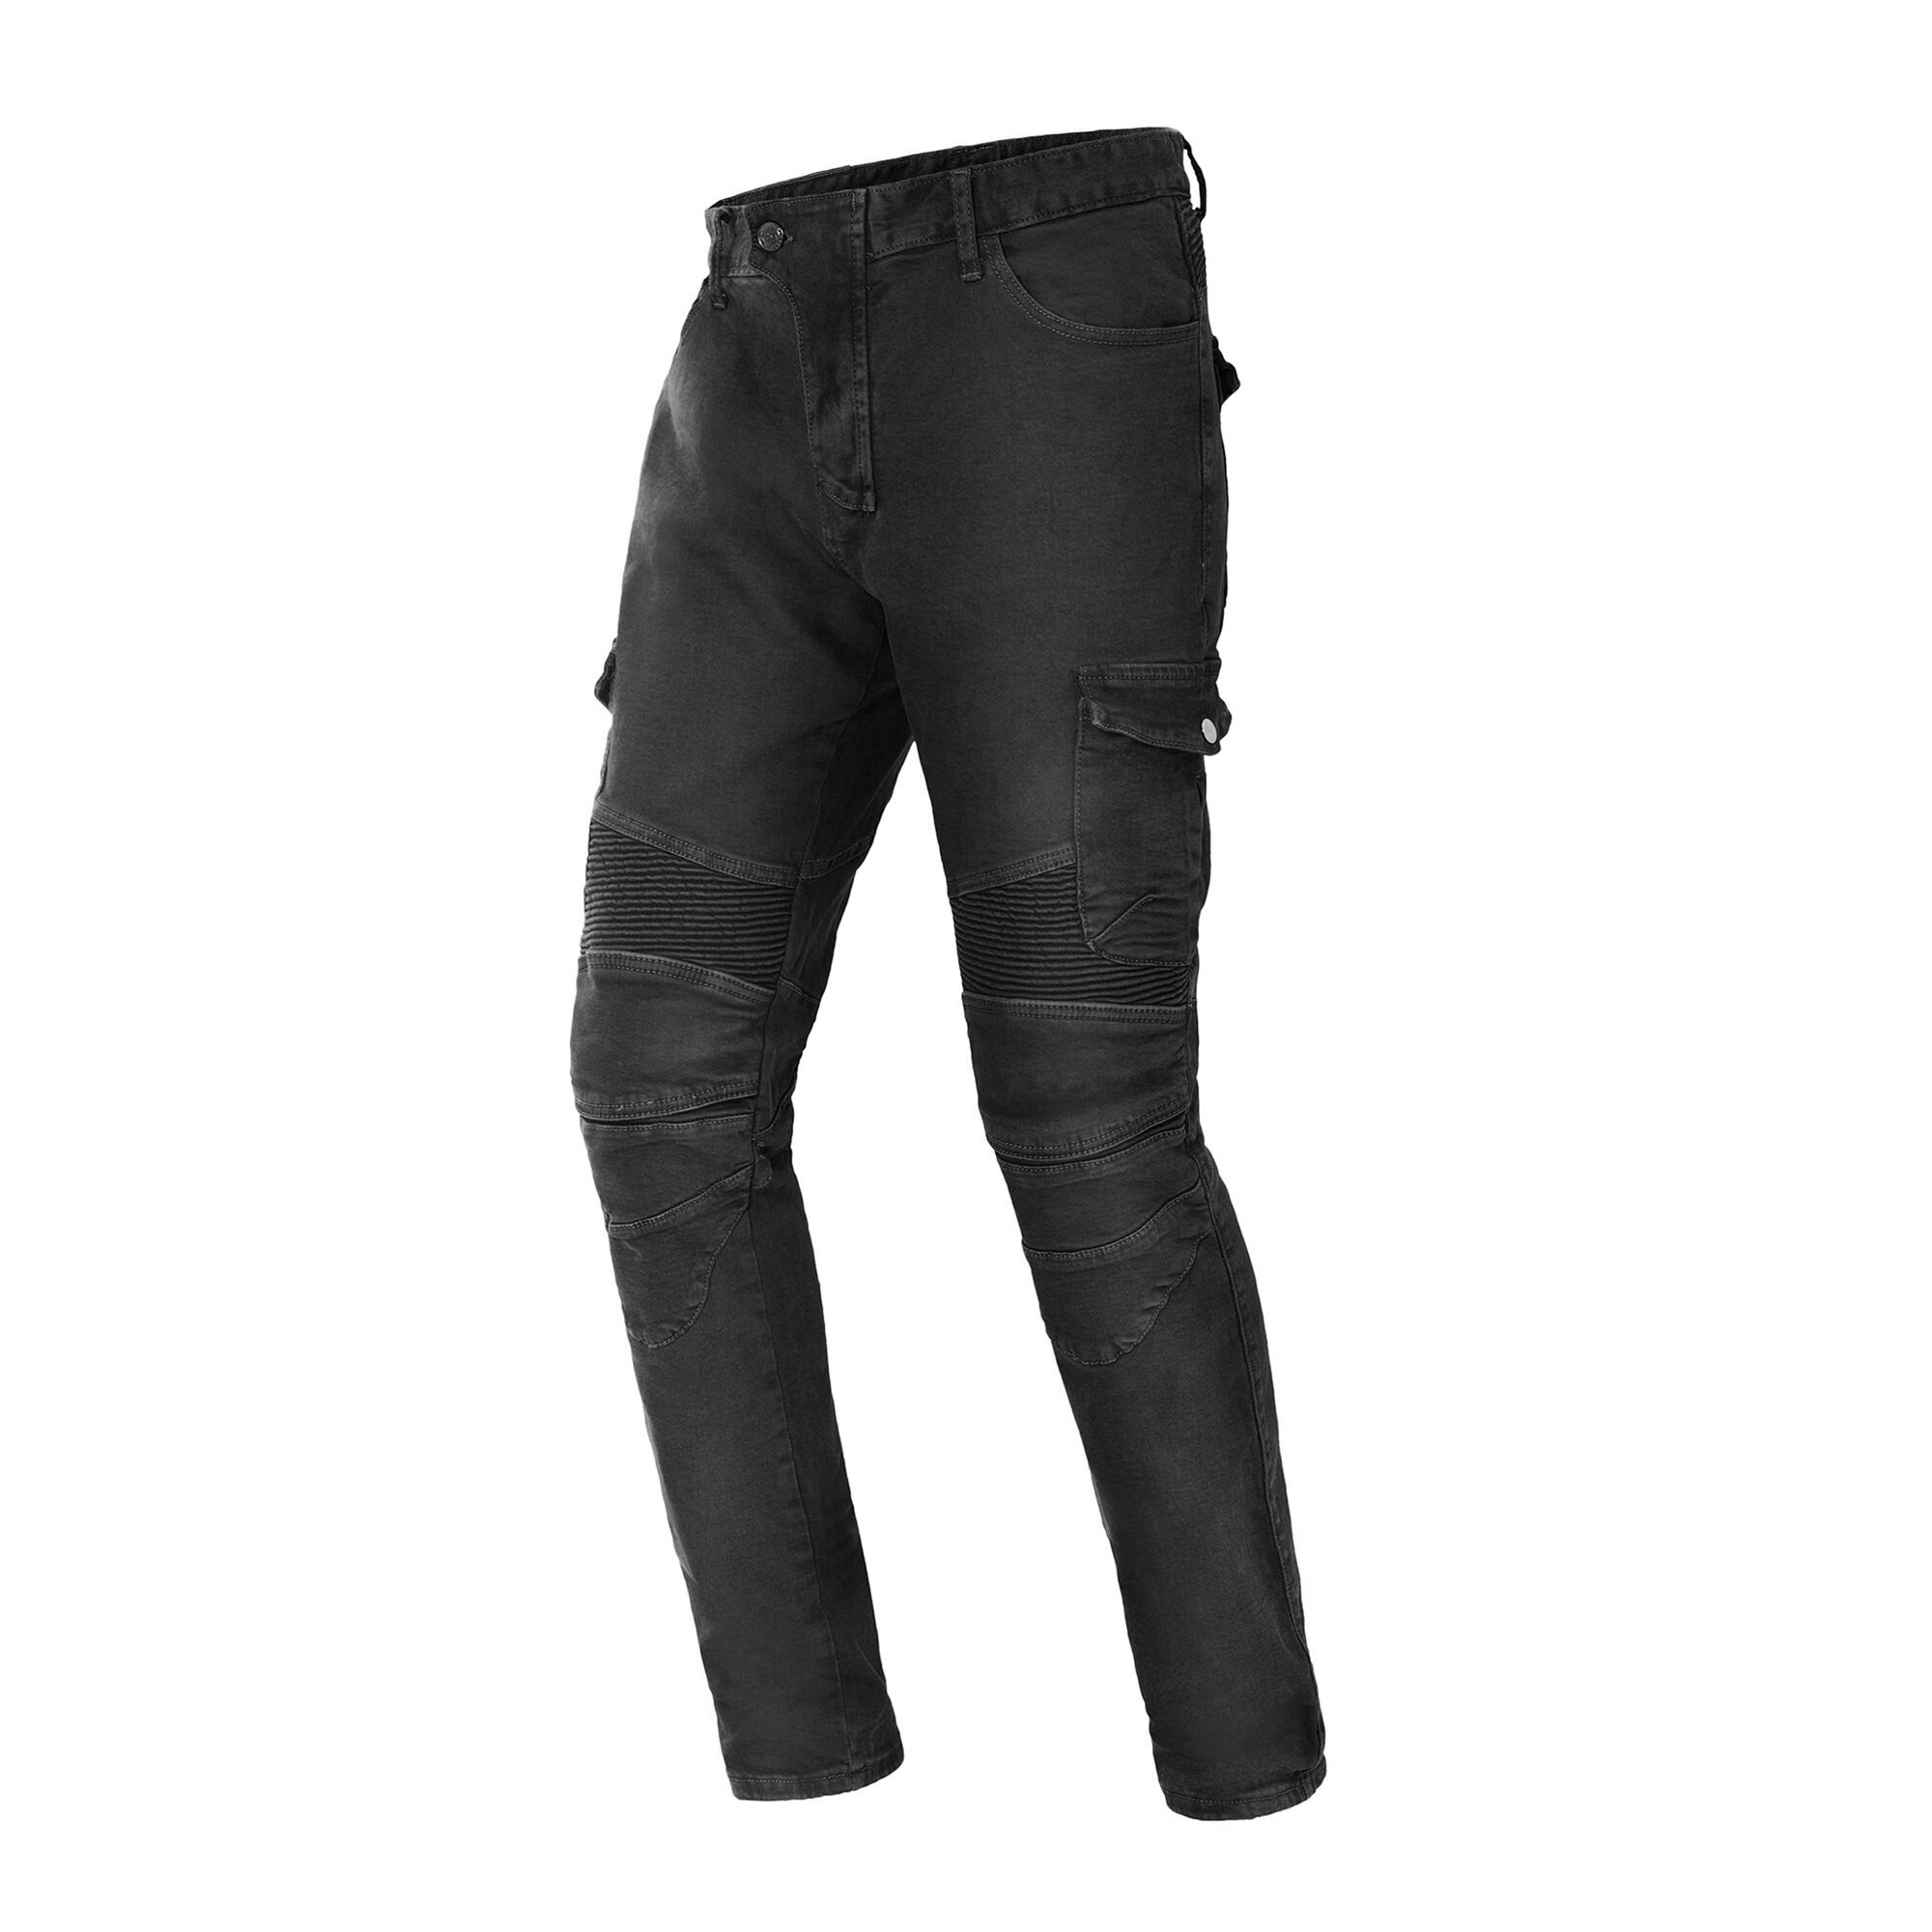 Image of GHOST RACING Motorcycle Pants Men Jeans Protective Gear Riding Trousers With Hip Protection+Knee Pads